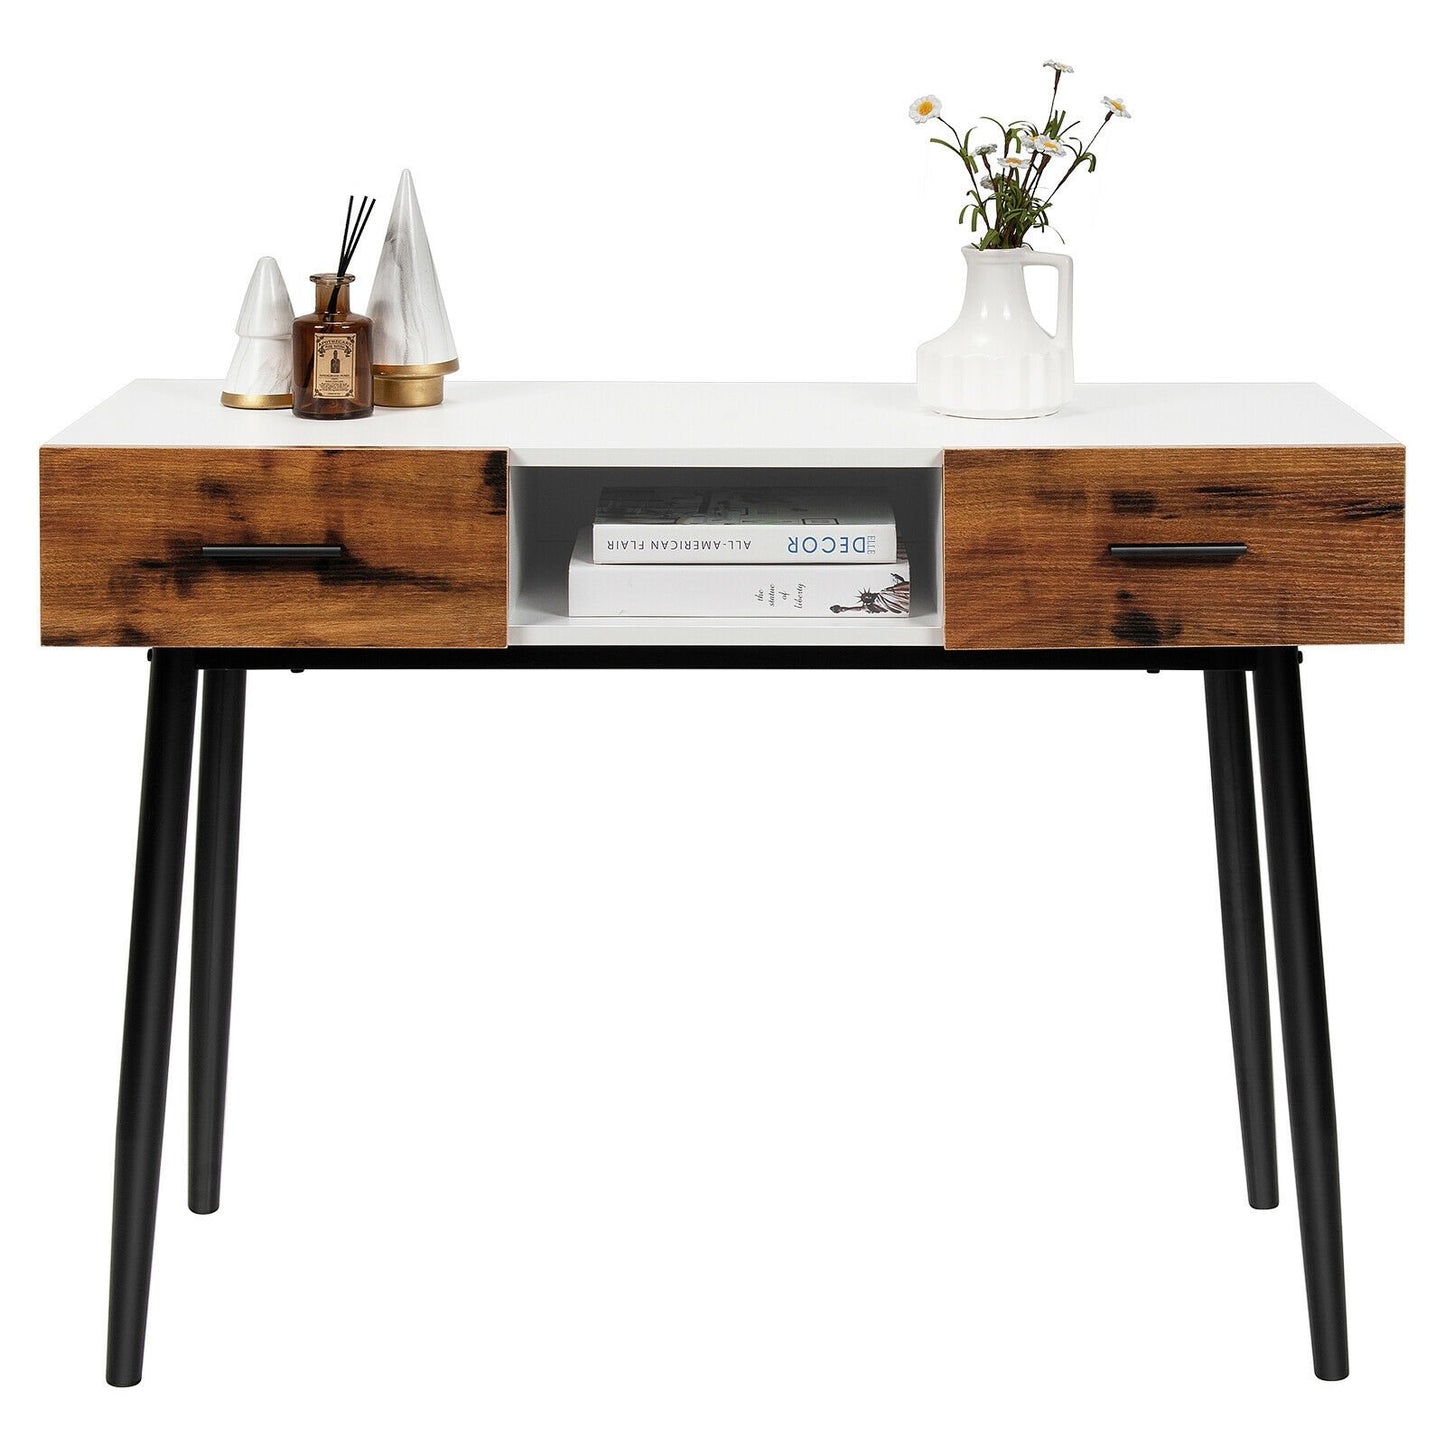 42 Inch Industrial Console Table with 2 Drawers for Entryway Hallway, Brown